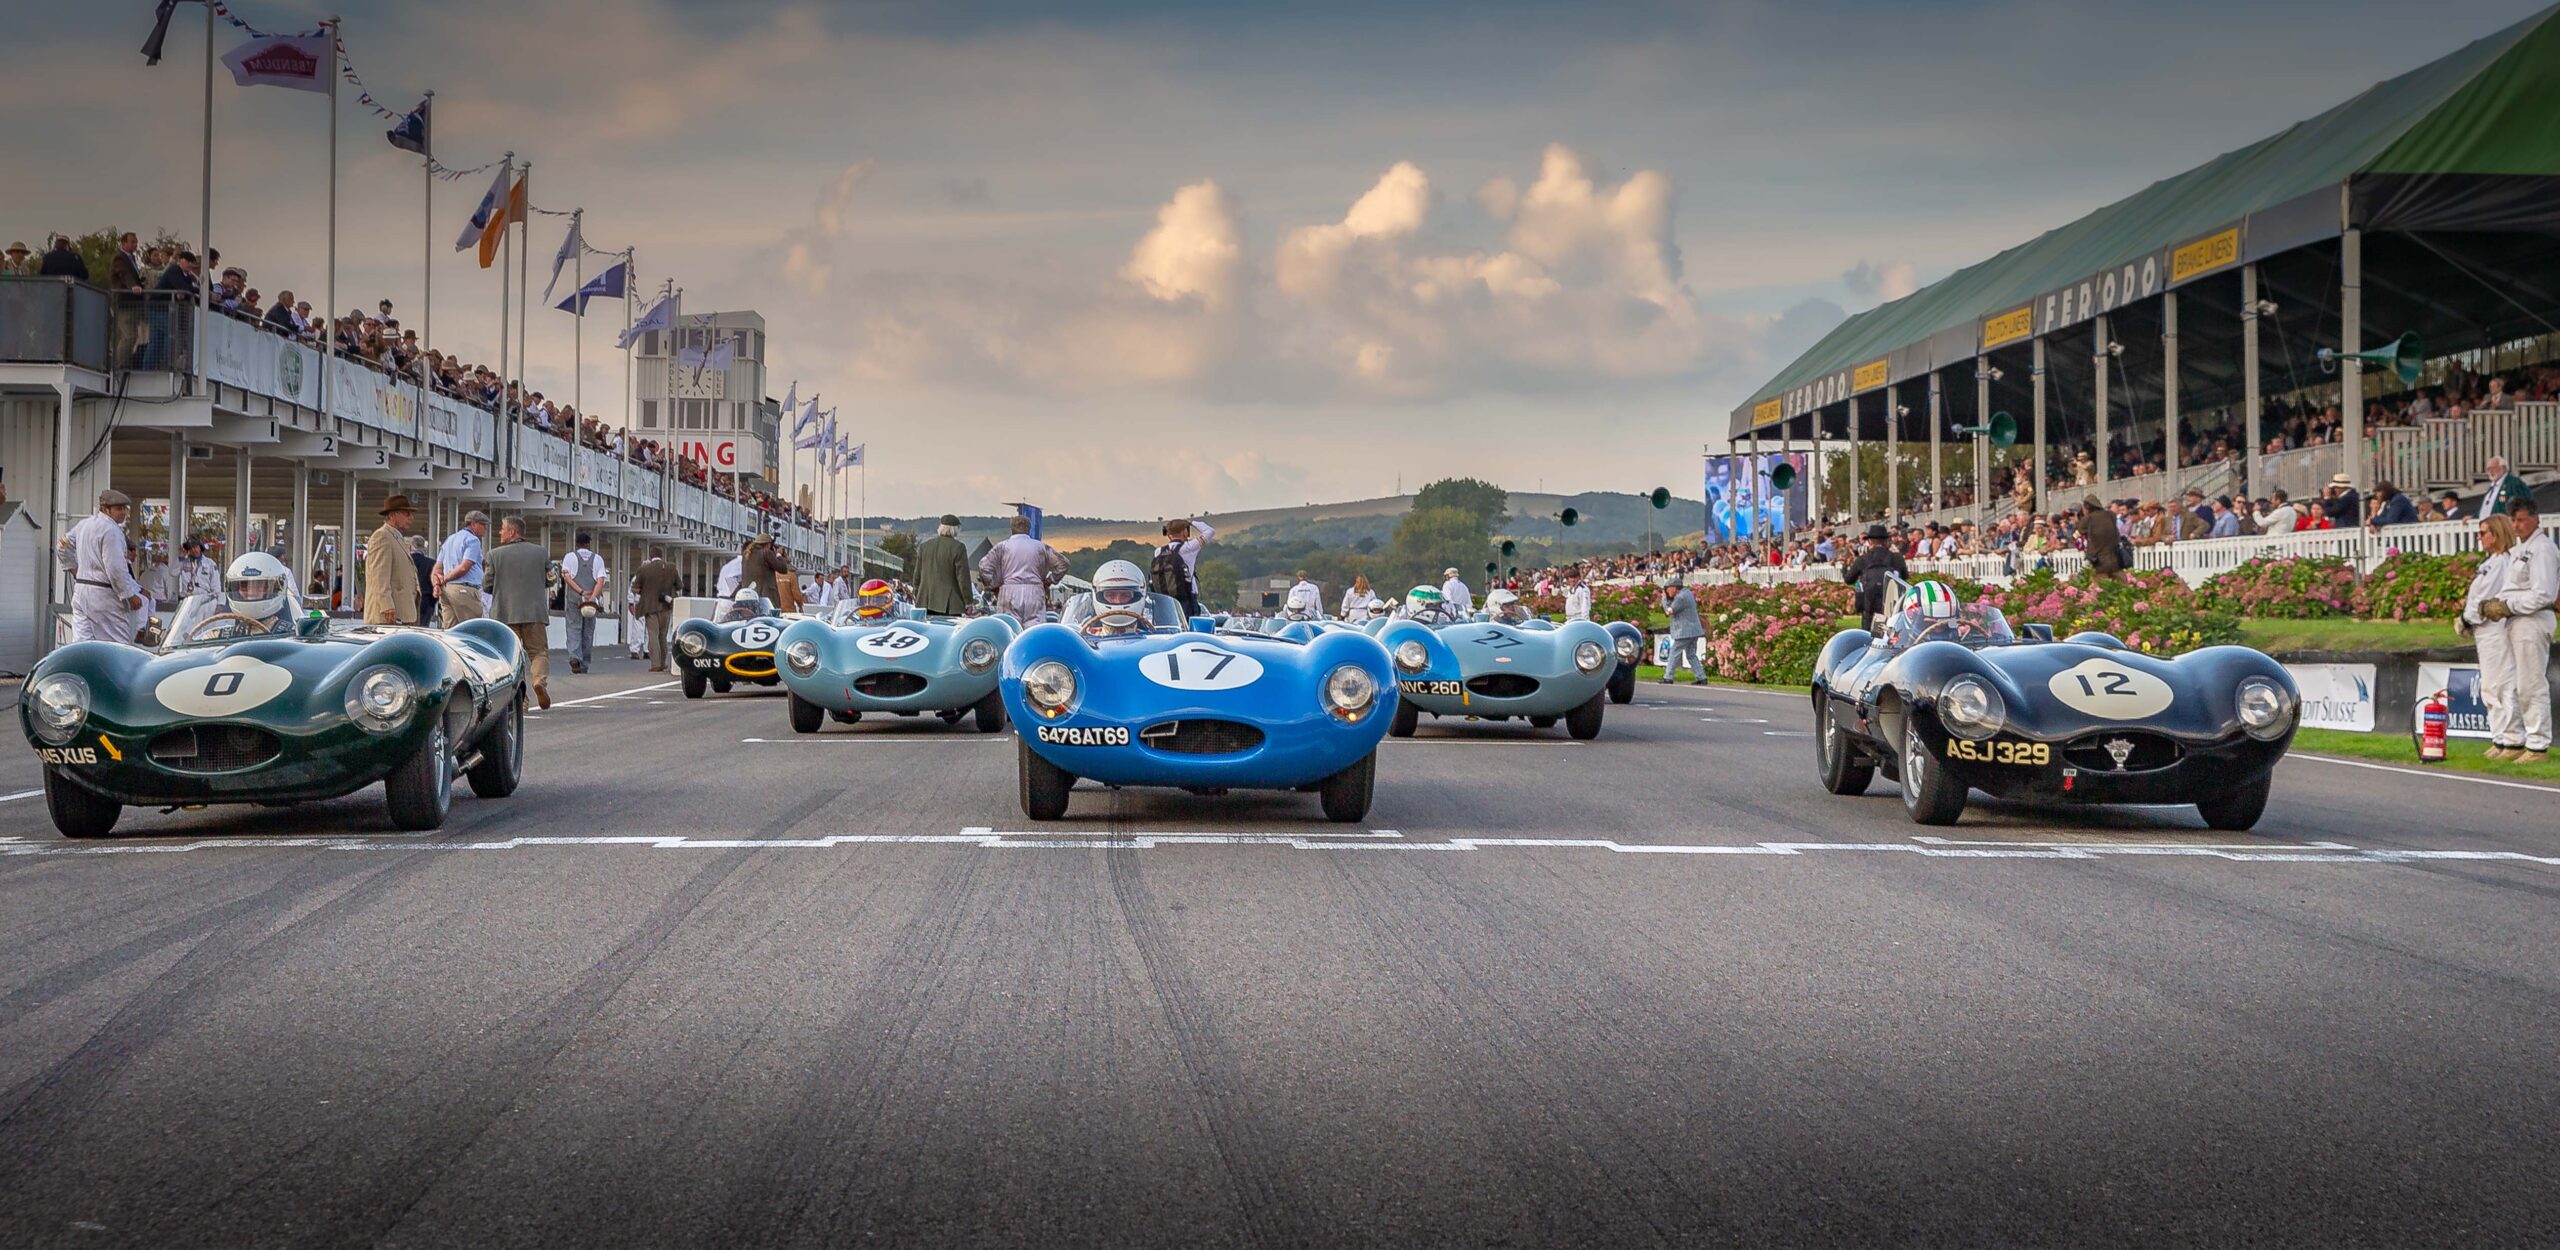 10 Years Addiction To The Goodwood Revival